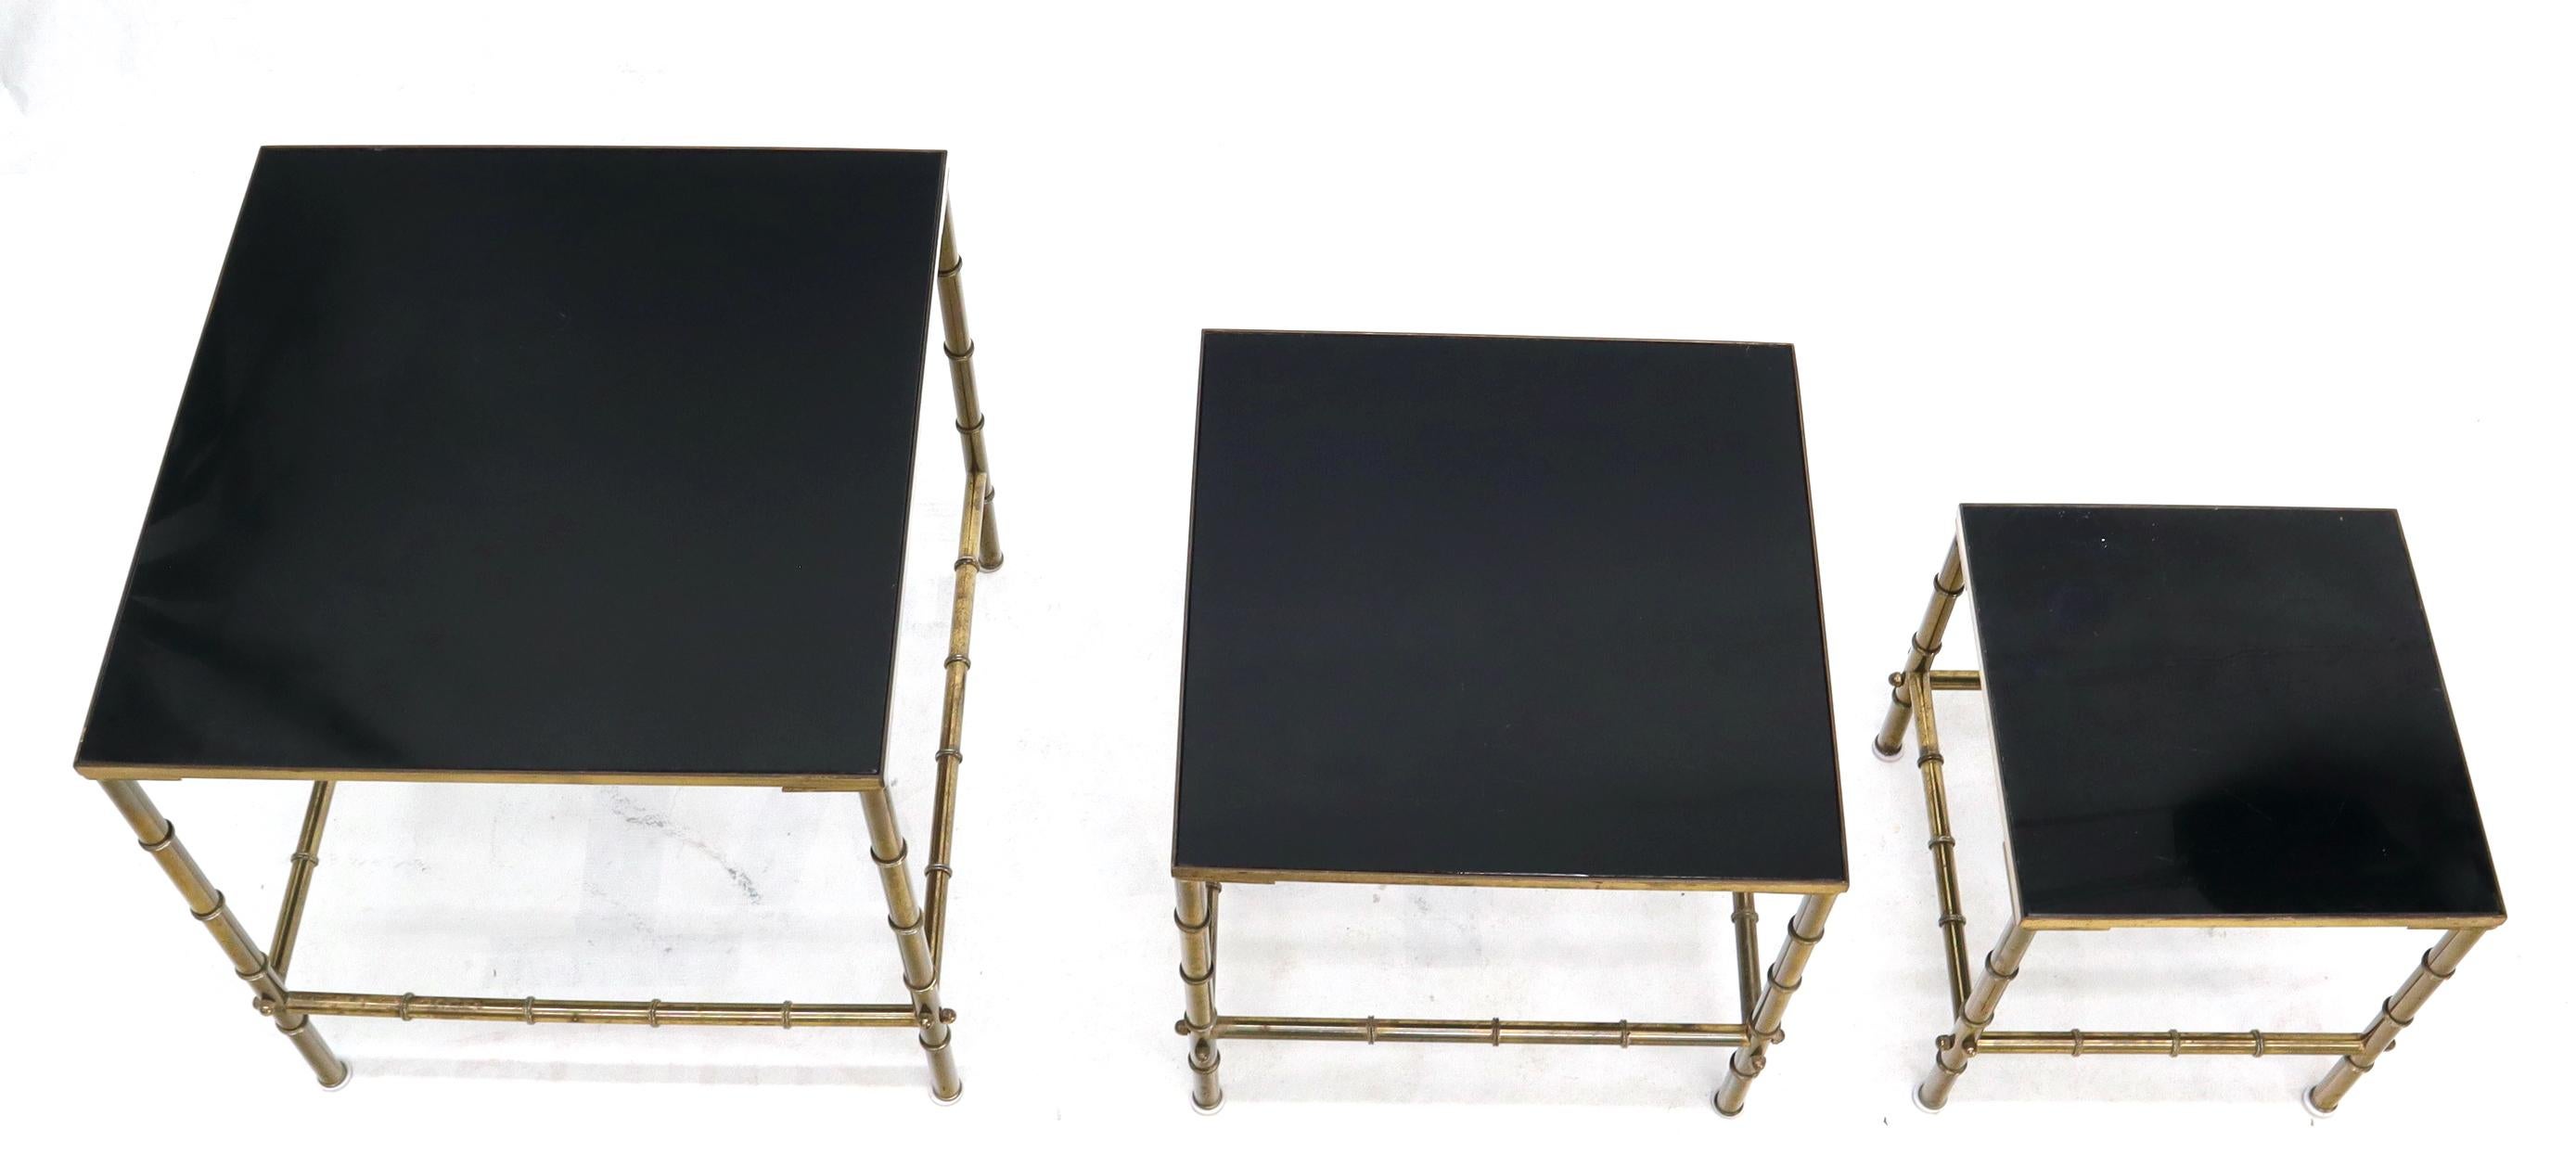 20th Century Solid Brass Faux Bamboo Set of 3 Nesting Tables with Black Vitrolite Glass For Sale